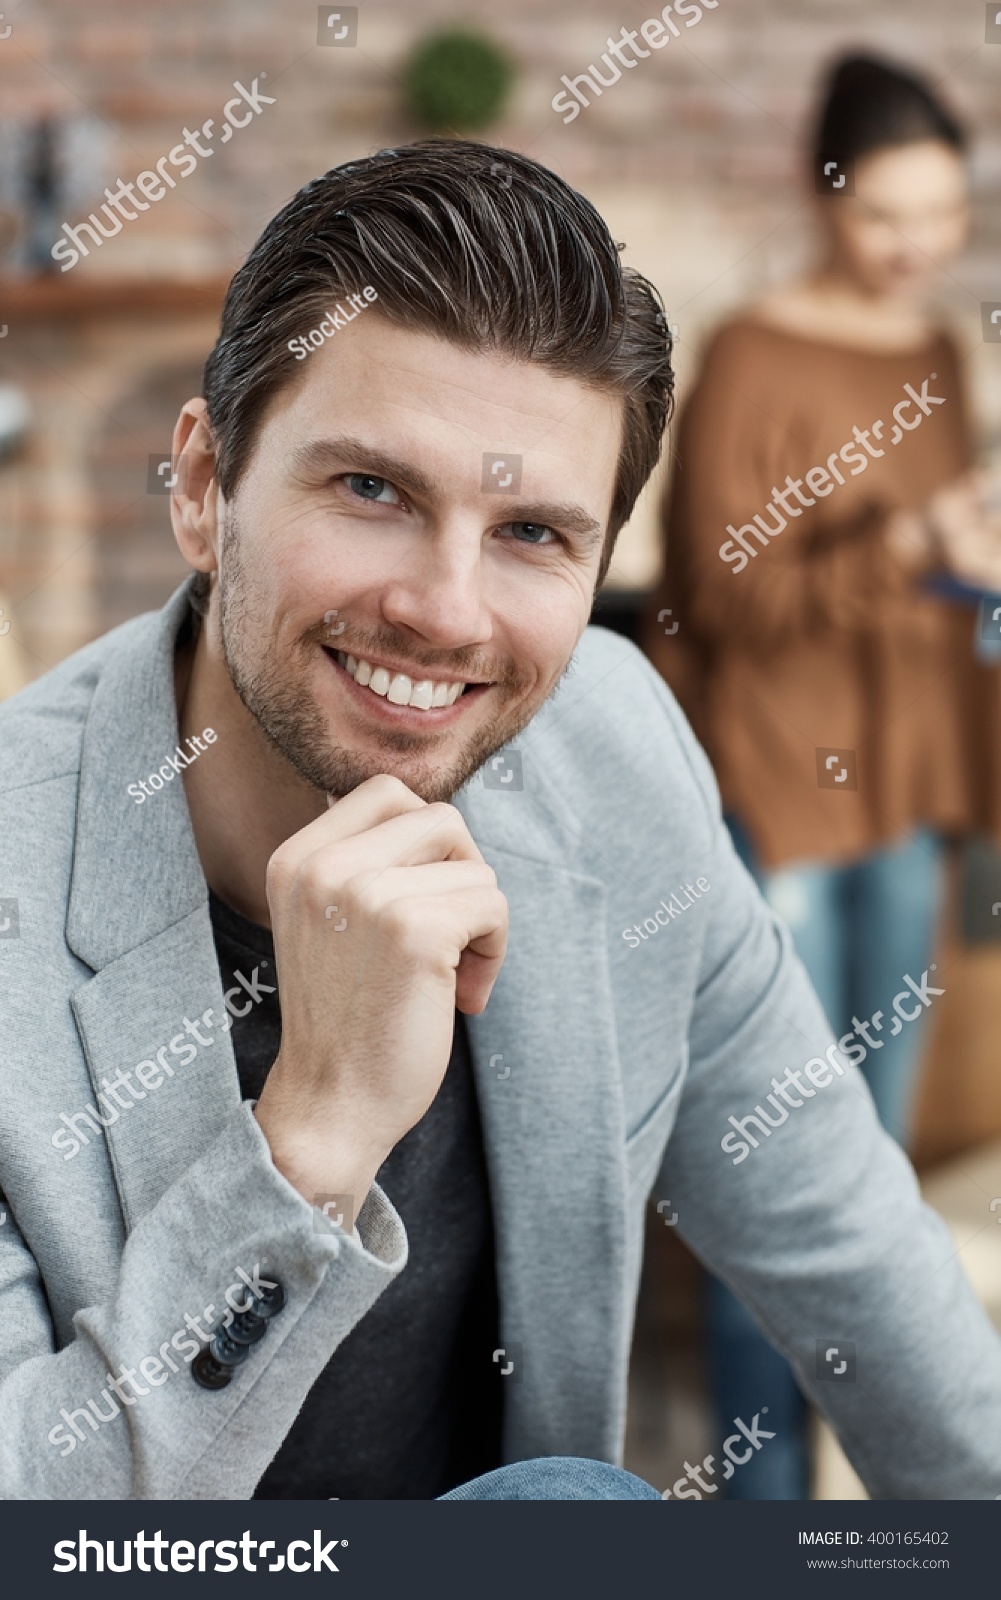 Save to a lightbox - stock-photo-portrait-of-confident-young-businessman-smiling-happy-hand-on-chin-400165402